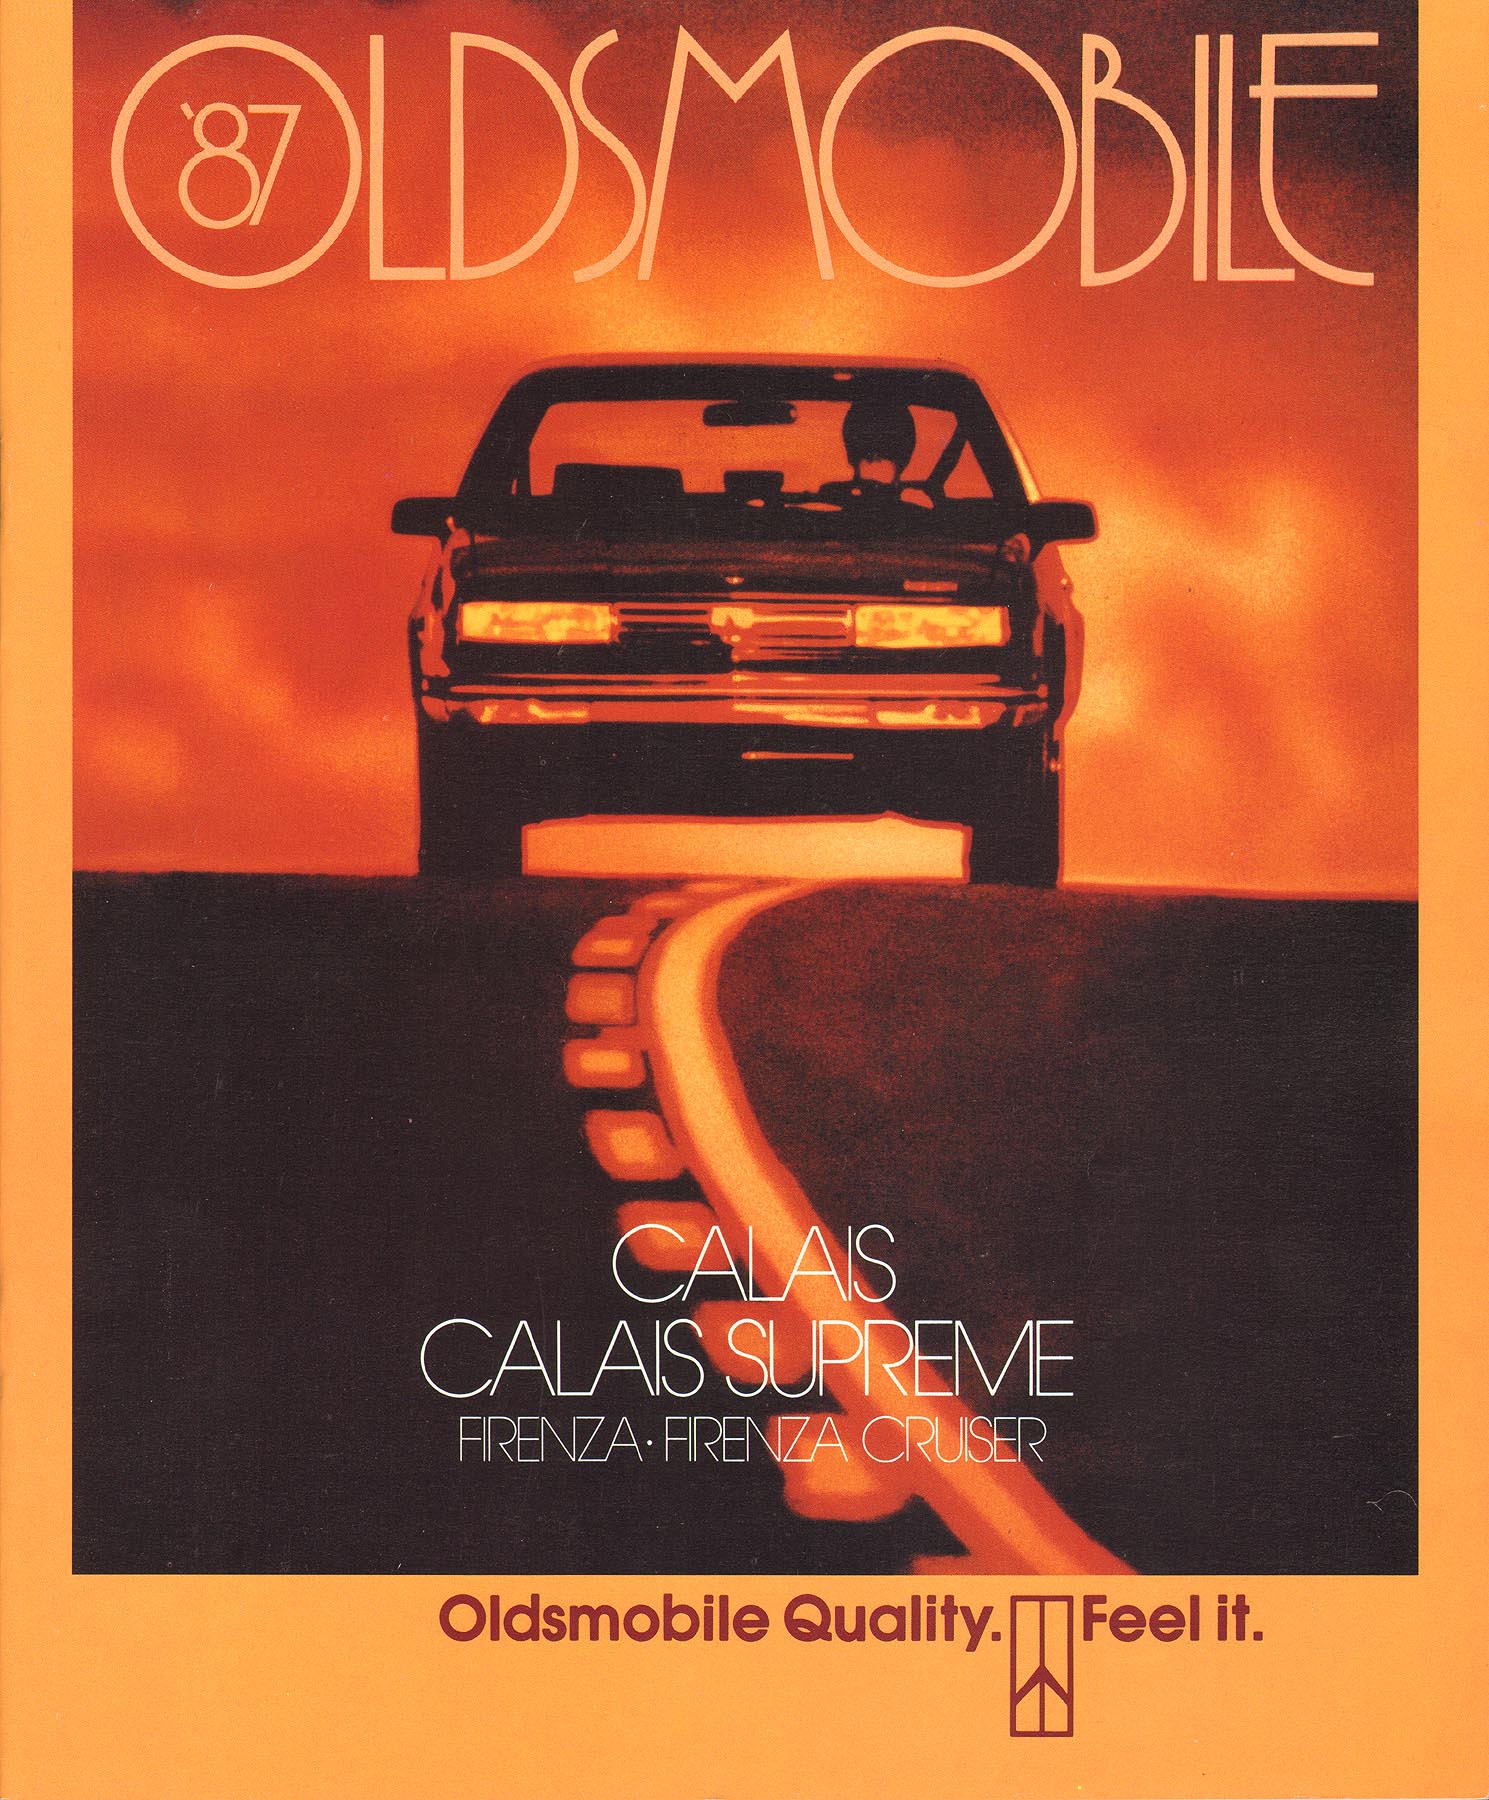 1987_Oldsmobile_Small_Size-01